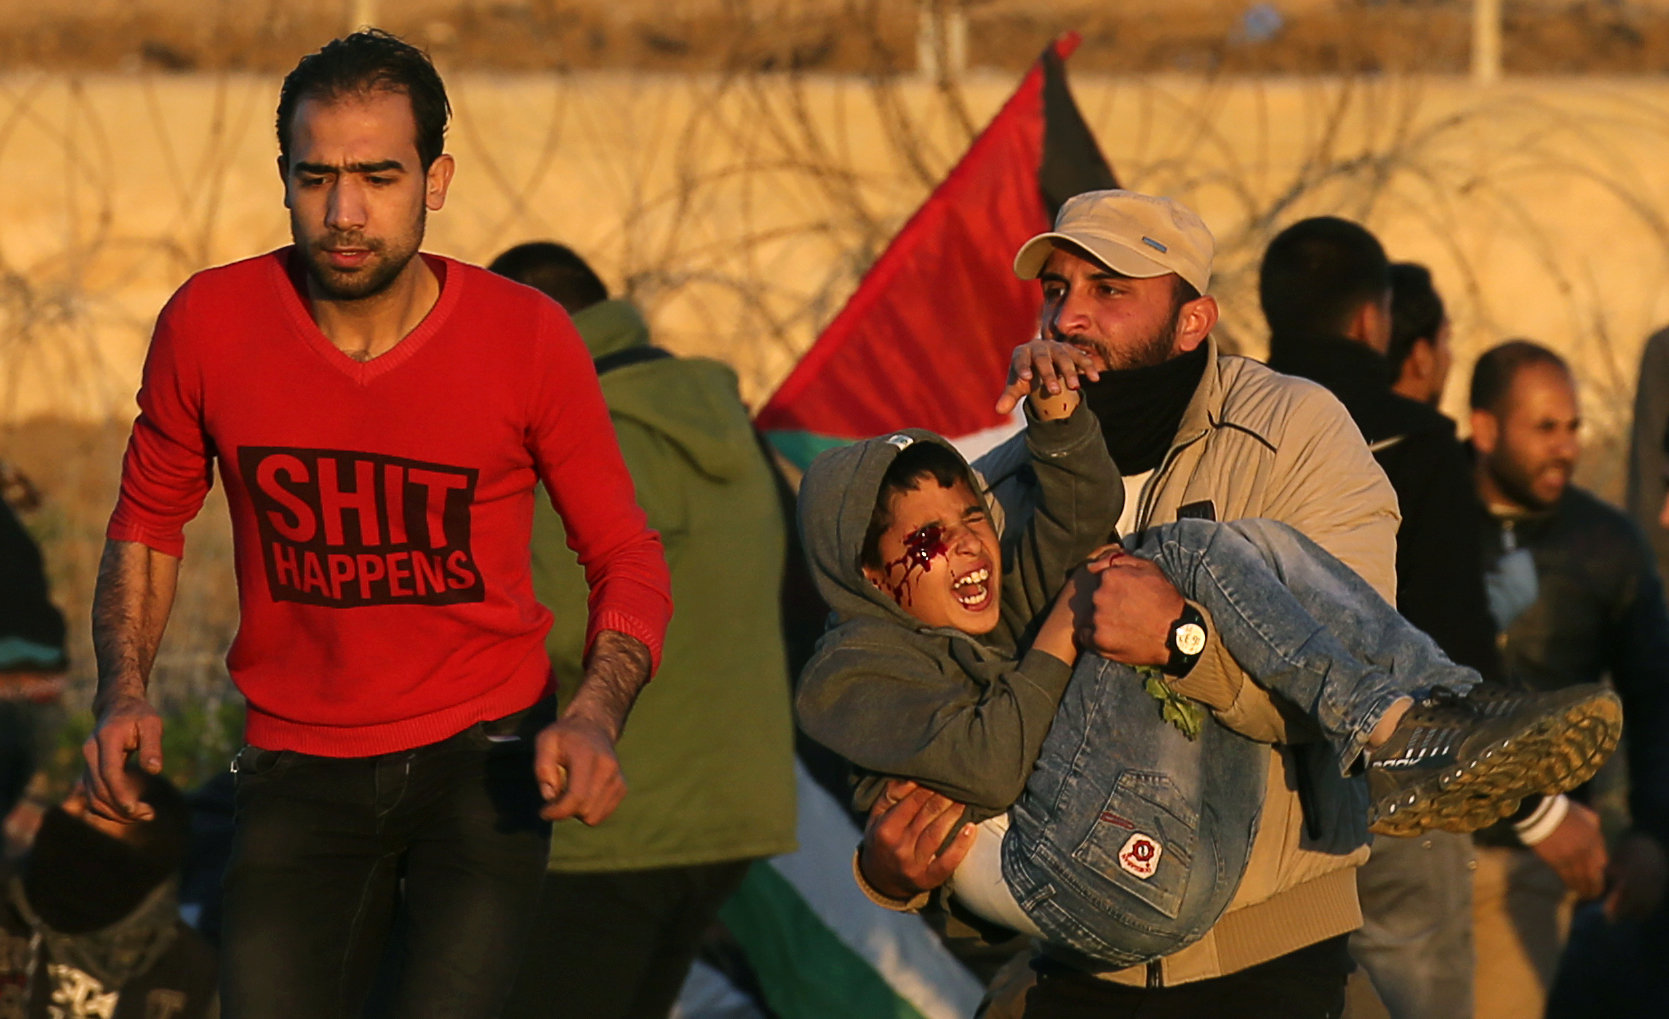 A wounded Palestinian boy is evacuated during a protest at the Israel-Gaza fence, in the southern Gaza Strip January 11, 2019.